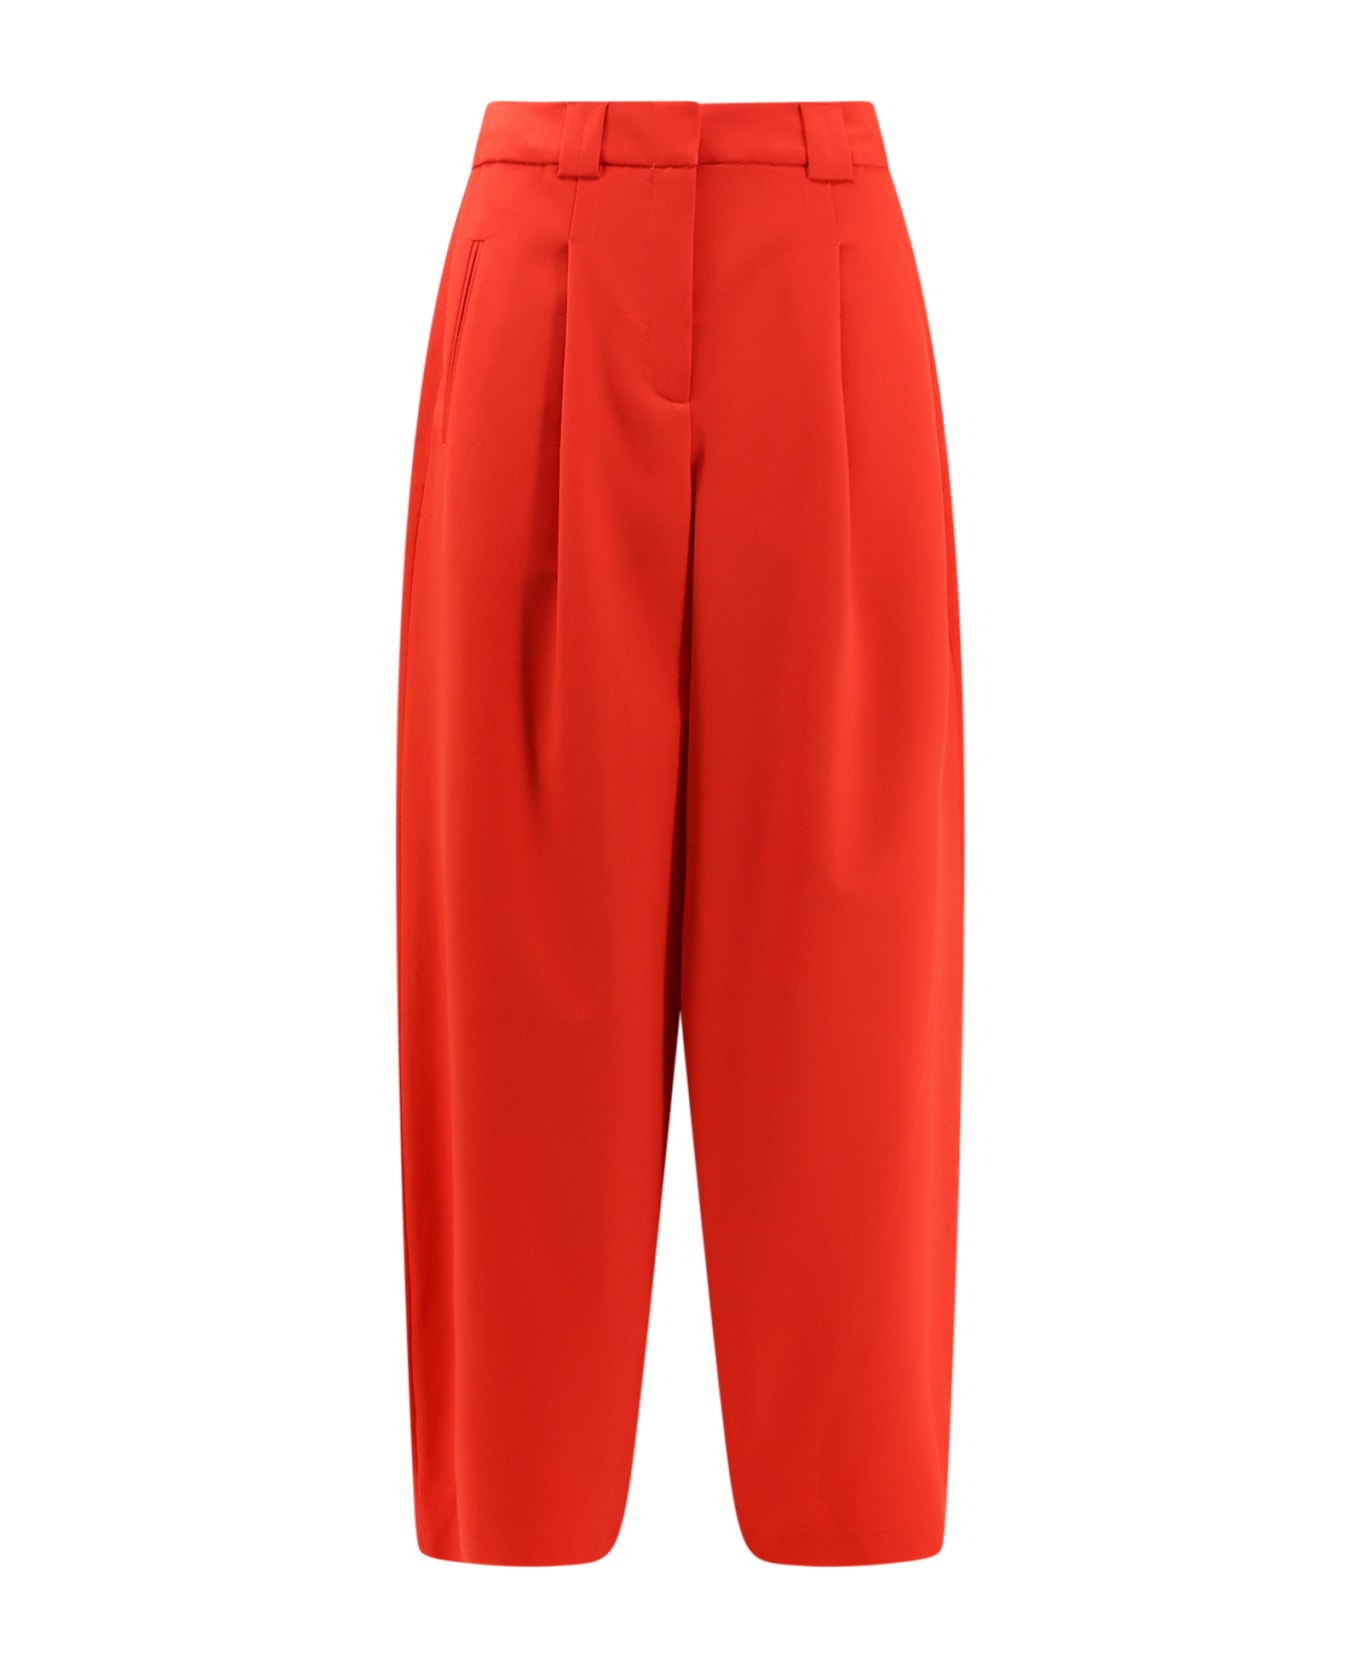 Closed Trouser - Red